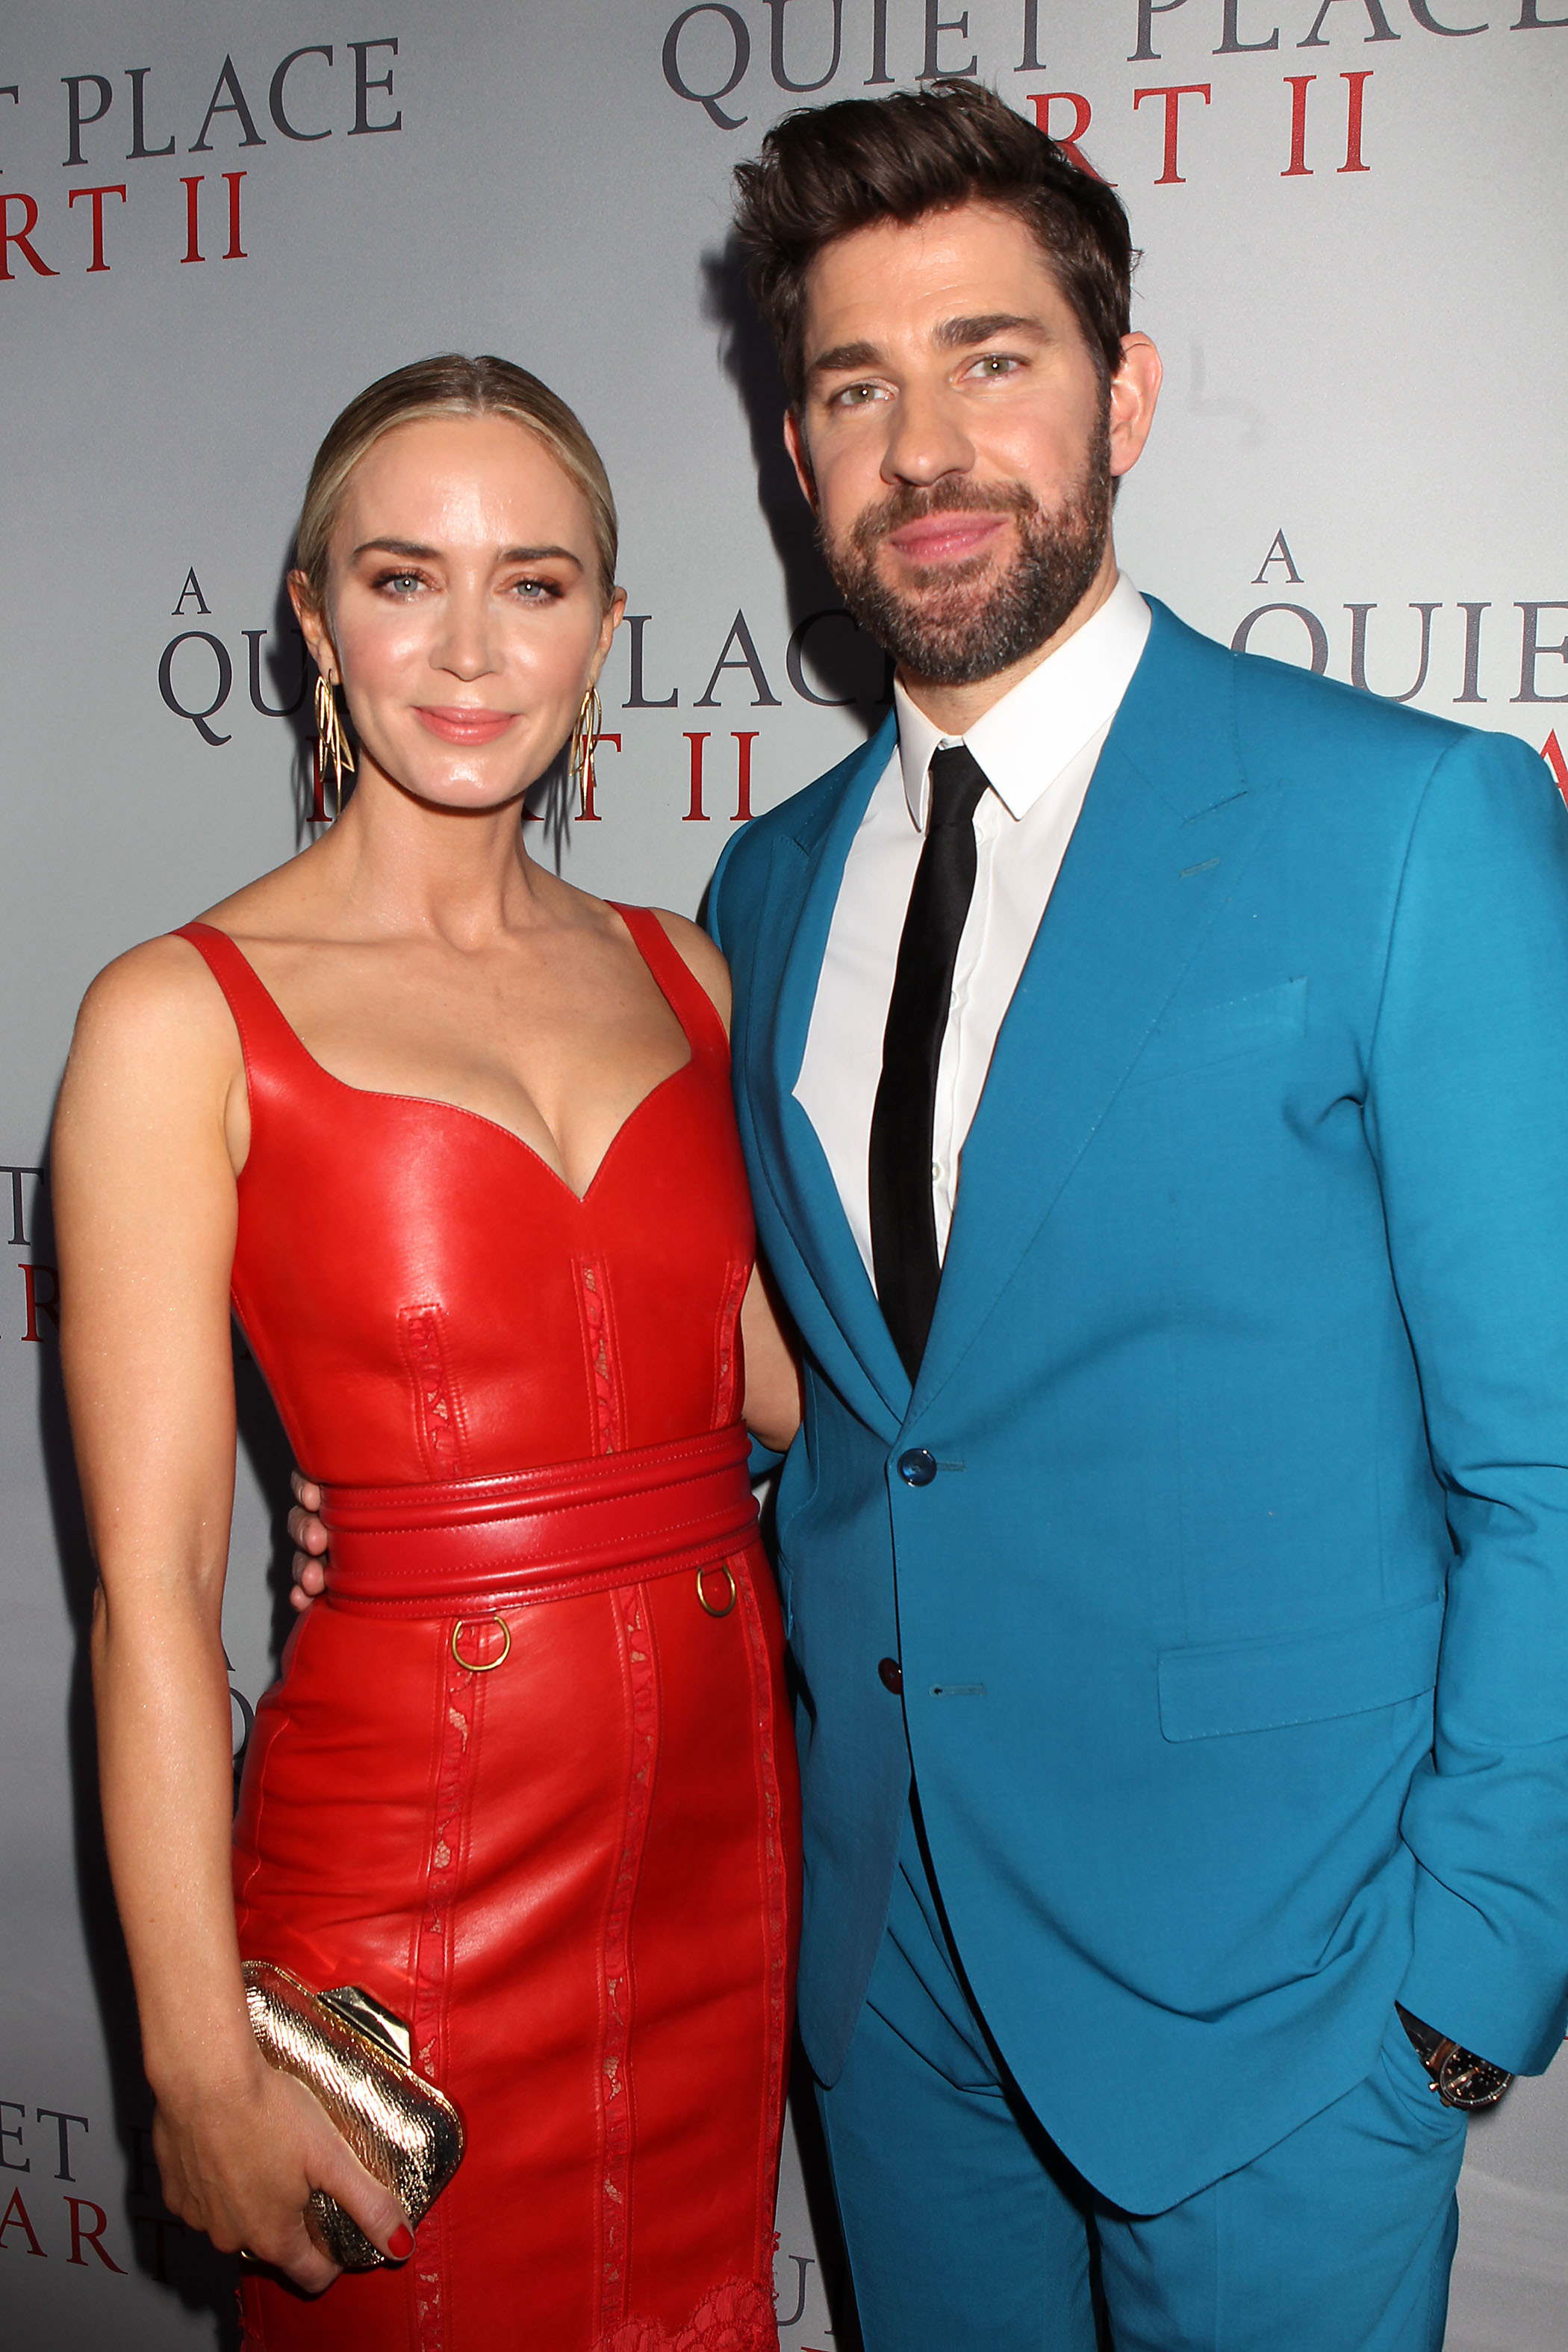 <p>During a 2012 appearance on "Conan," John Krasinski revealed he found Emily Blunt to be "incredibly intimidating" and that he was "scared out of my mind" to <a href="http://www.wonderwall.com/celebrity/profiles/john-krasinski-10-reasons-to-love-13-hours-secret-soldiers-of-benghazi-star-33441.gallery?photoId=142834">ask her out</a> on a date because he just didn't think he was good enough for her. After she agreed to go out with him, "I decided I'm gonna really hit the gas and bring her to a gun range," John explained. "I think that I was so sure that I would never end up with her because she'd be like, 'This is ridiculous, I can have anyone, not you,' that I was like, 'I'm going to blow it right away,' and then that way you don't feel bad." He admitted he also "yelped" the first time he fired a gun on the date! In 2018, Emily told People magazine that she was at a restaurant having lunch with a friend when it all kicked off for her. "[My friend and I] were discussing how much I was enjoying being single. And then [my friend] goes, 'Oh, my God, there's my friend John.' And that was it. We were engaged within 10 months, but I think we probably knew before that." They married in 2010 and now have two daughters. </p>